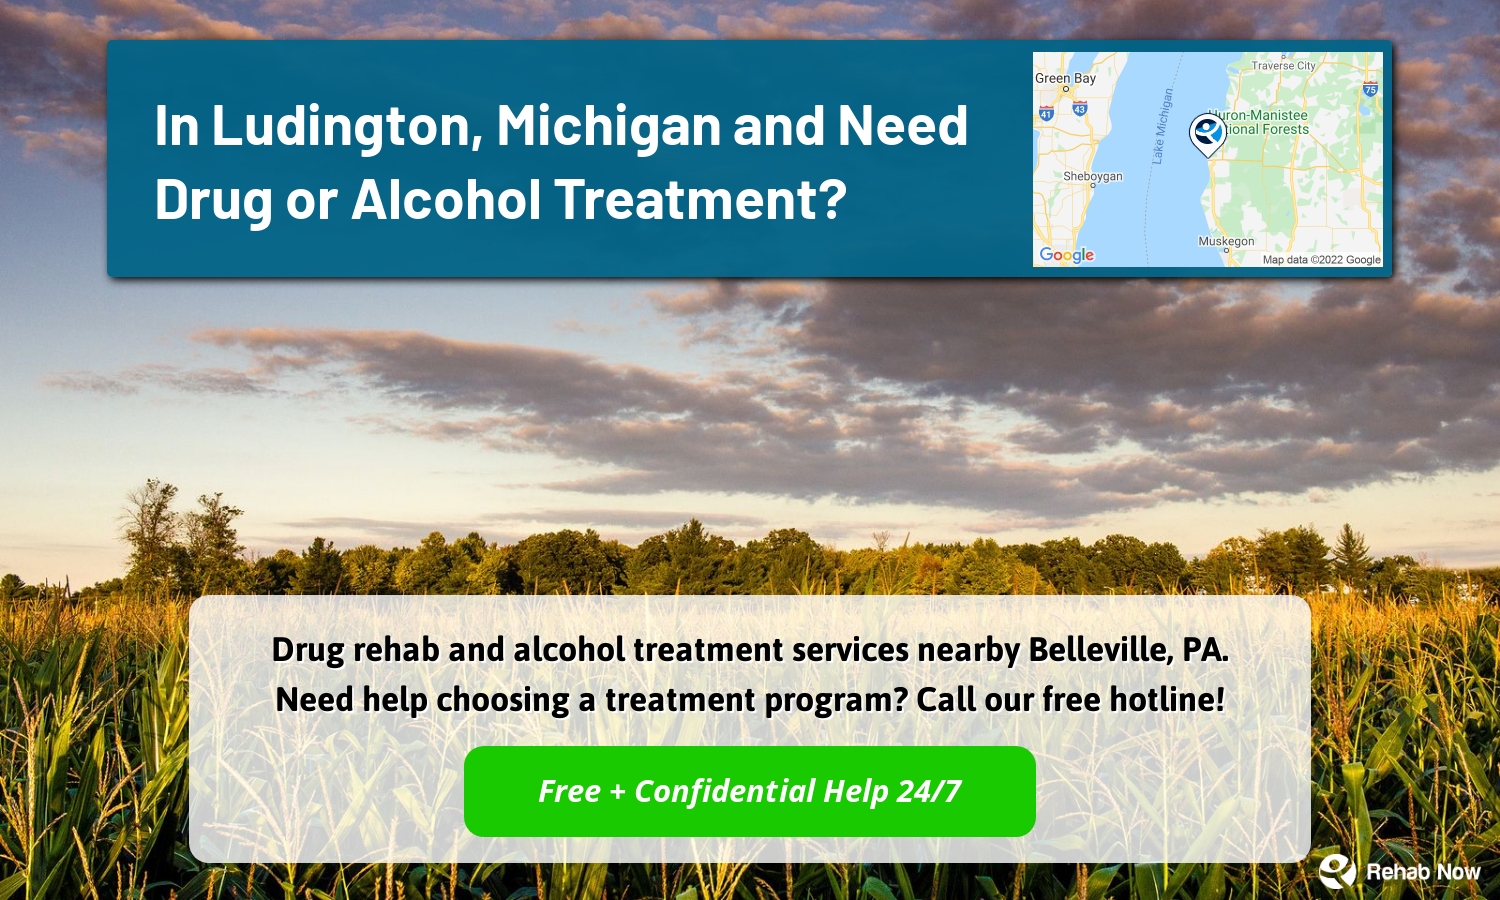 Drug rehab and alcohol treatment services nearby Belleville, PA. Need help choosing a treatment program? Call our free hotline!